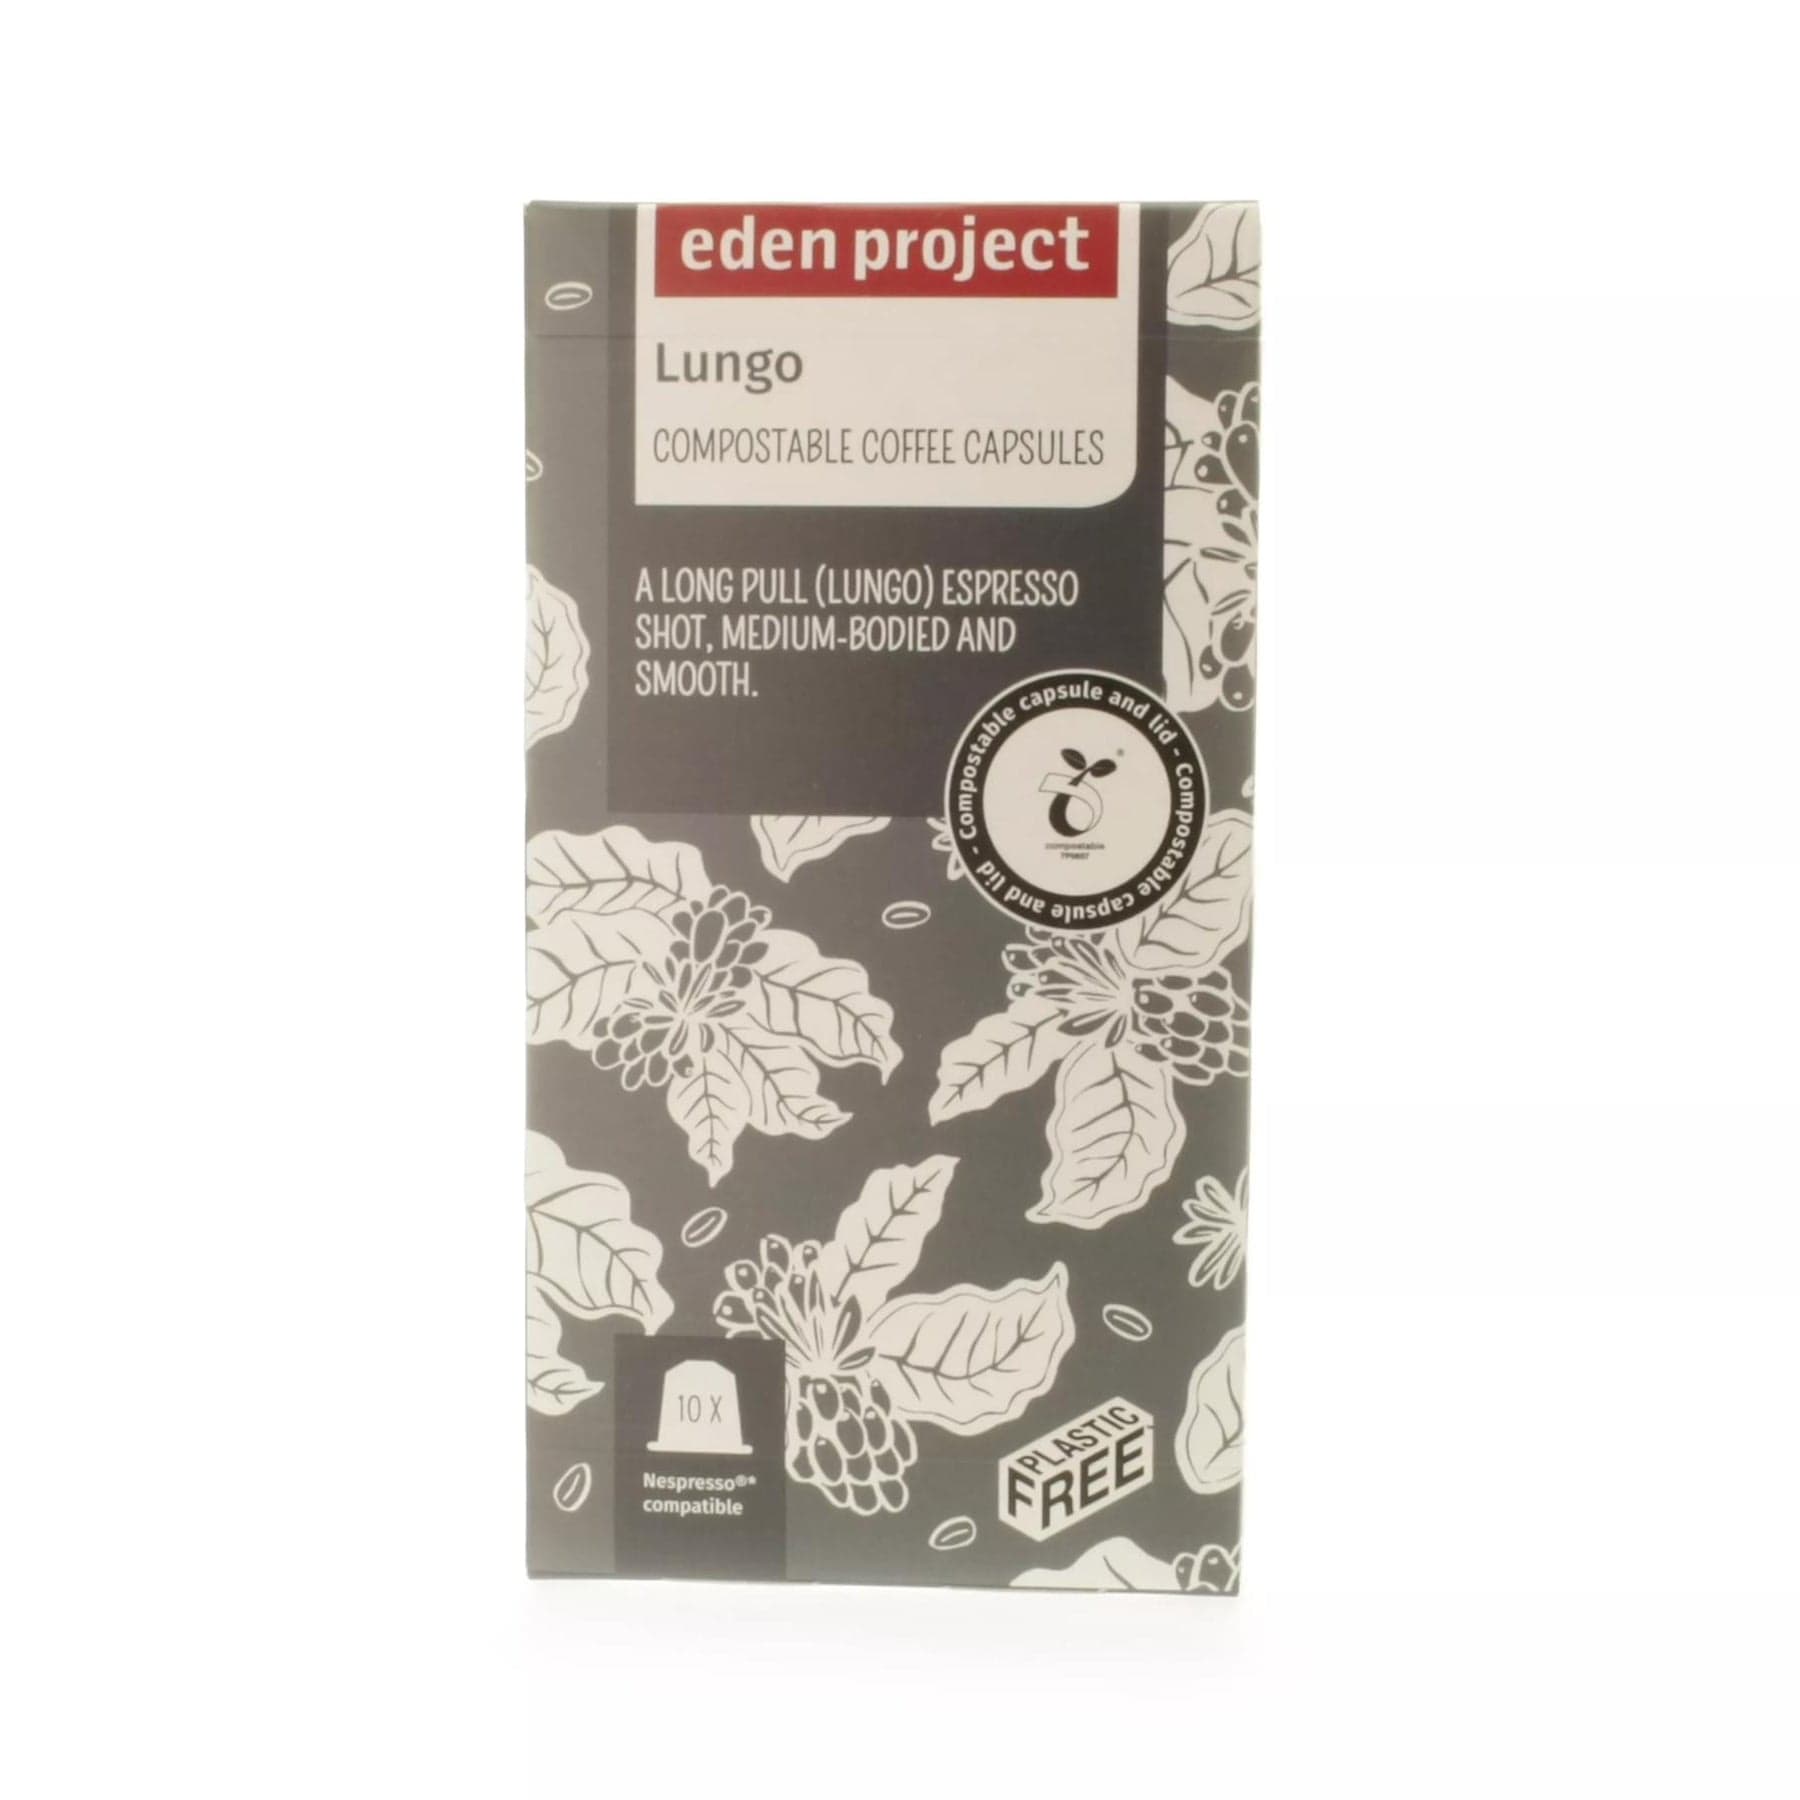 Eden Project Lungo compostable coffee capsules packaging with floral design, labeled as medium-bodied and smooth, Nespresso compatible, 10x, plastic-free.